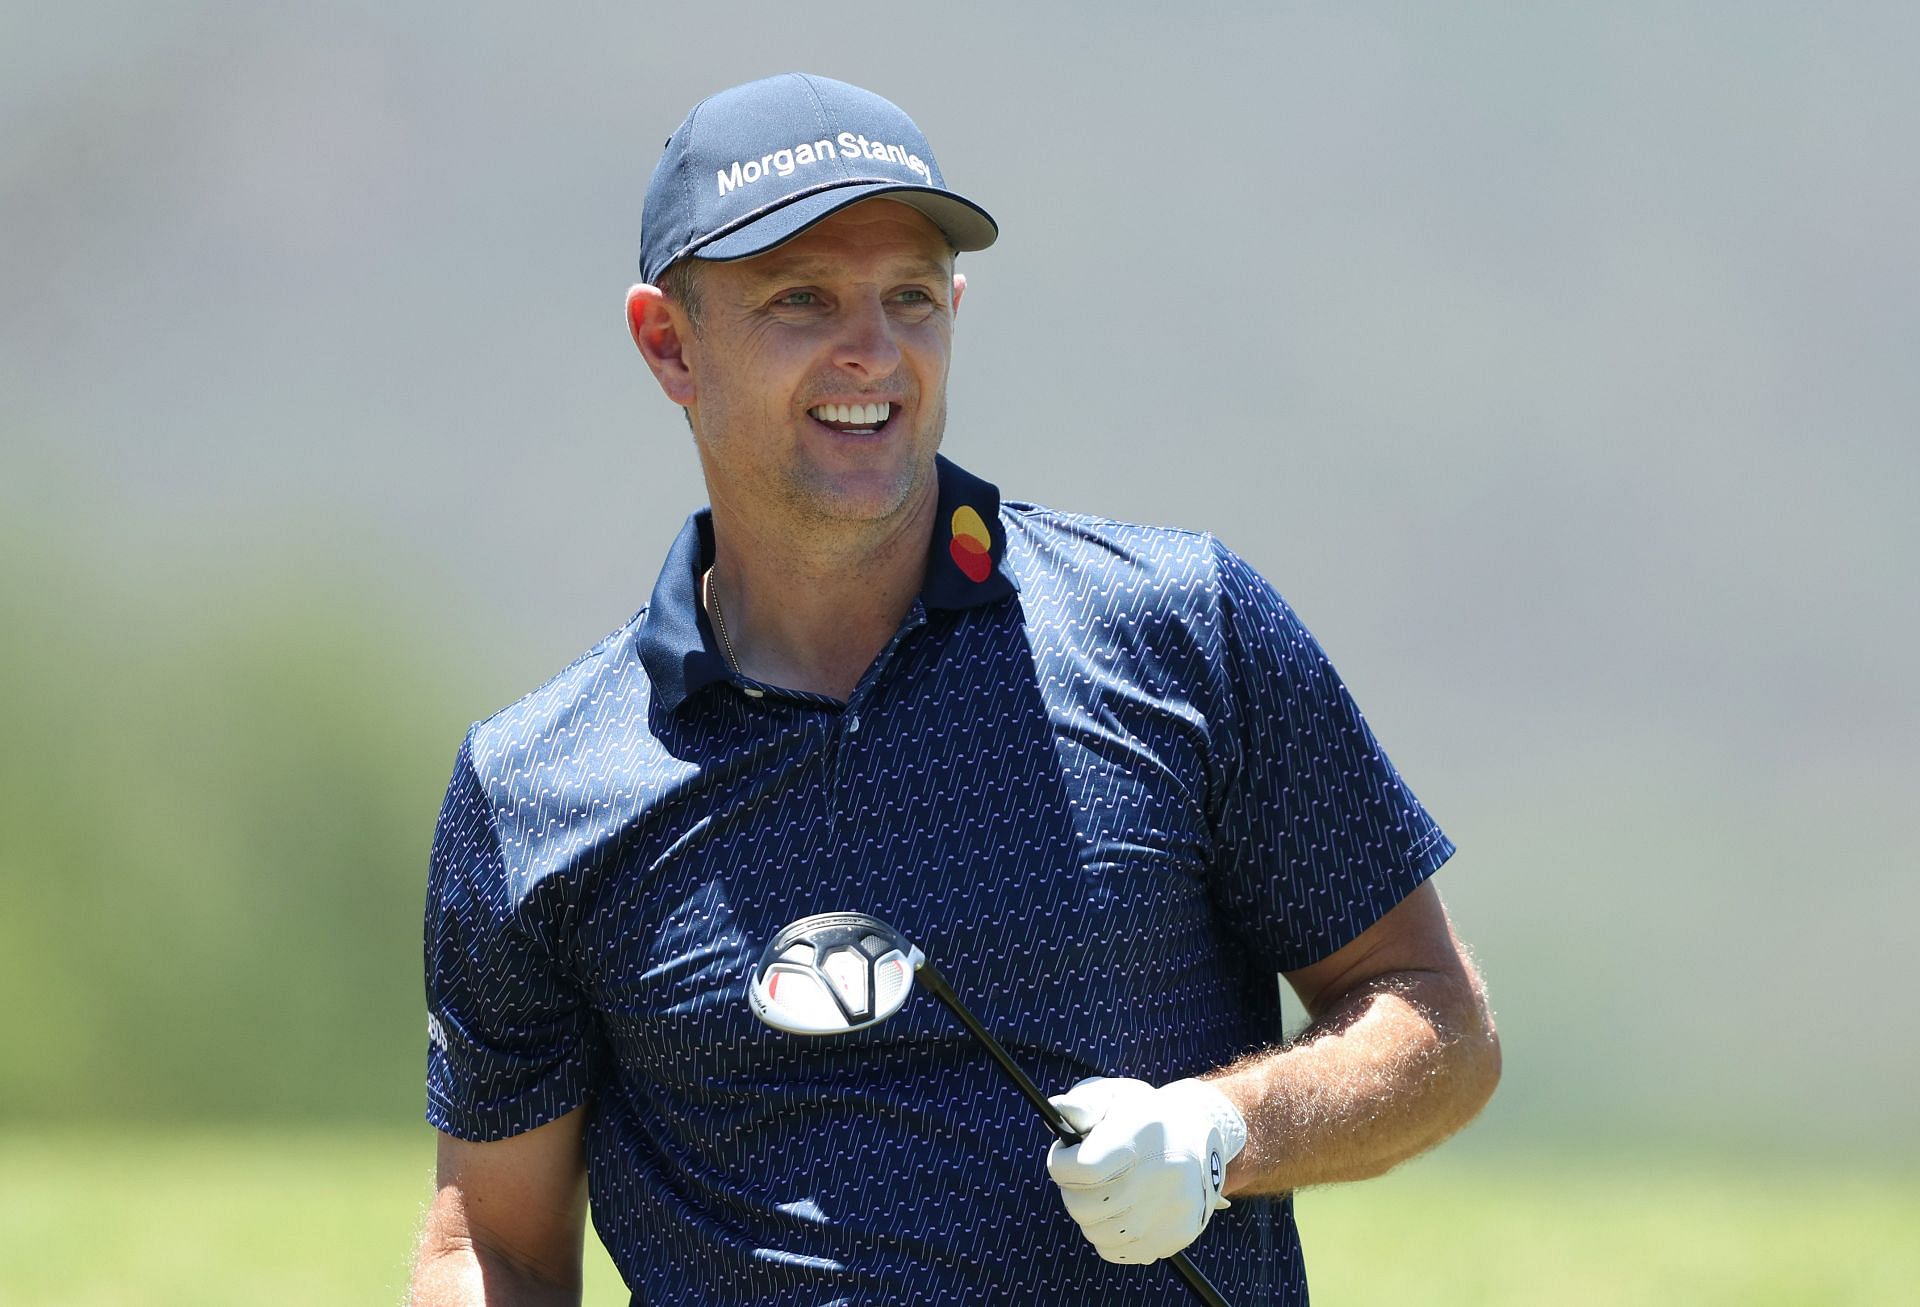 Justin Rose joined the TGL team Los Angeles Golf Club